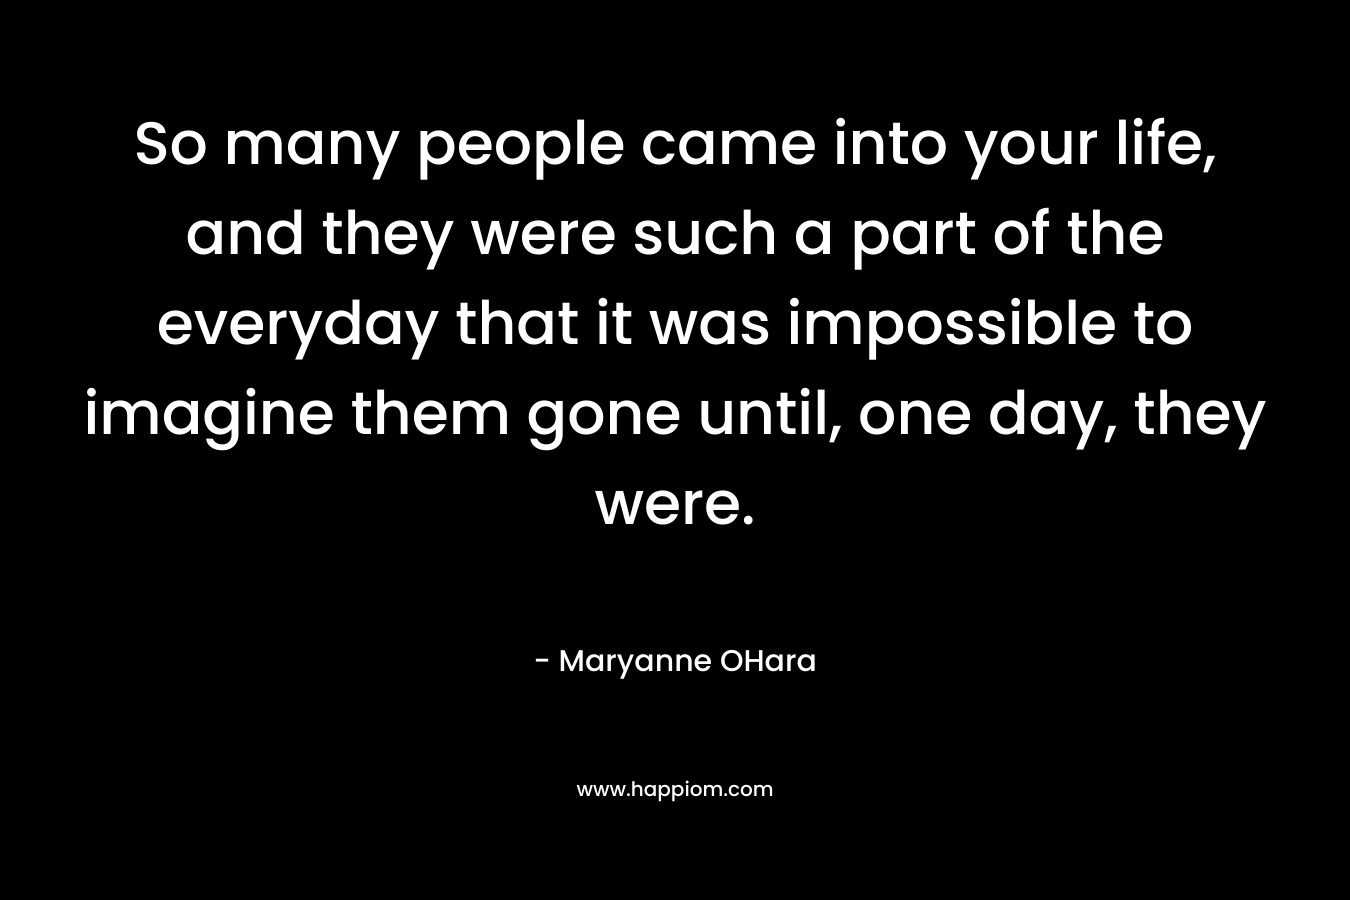 So many people came into your life, and they were such a part of the everyday that it was impossible to imagine them gone until, one day, they were. – Maryanne OHara